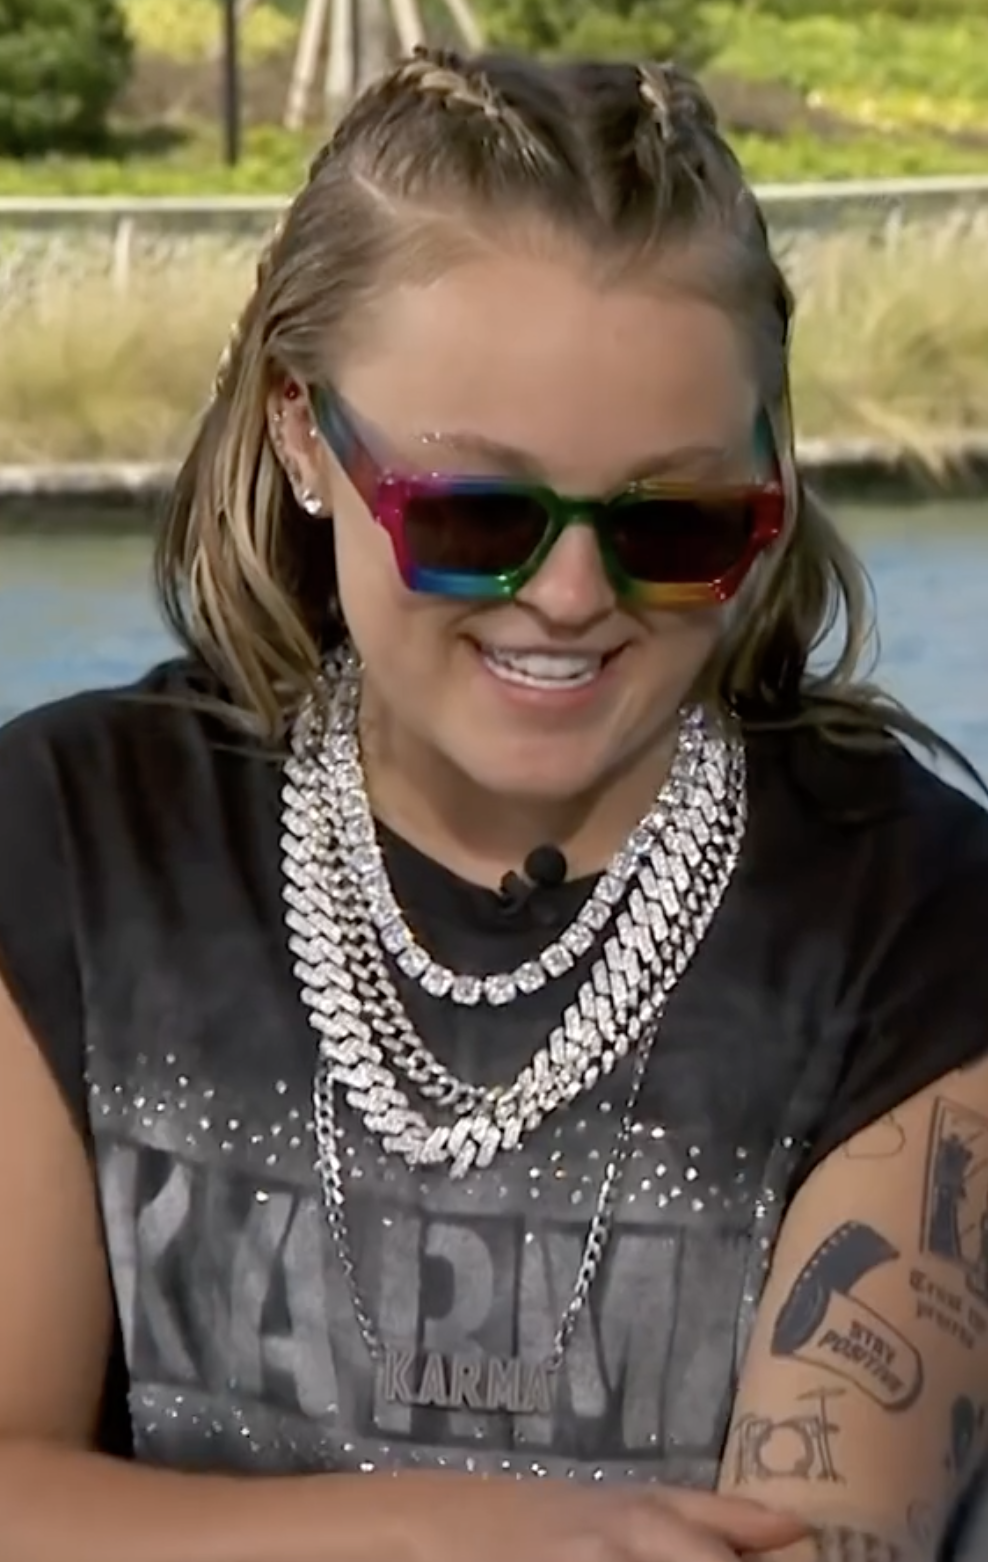 JoJo Siwa smiles while wearing rainbow sunglasses, layered chain necklaces, and a &quot;KARMA&quot; t-shirt. Her arm tattoos are visible